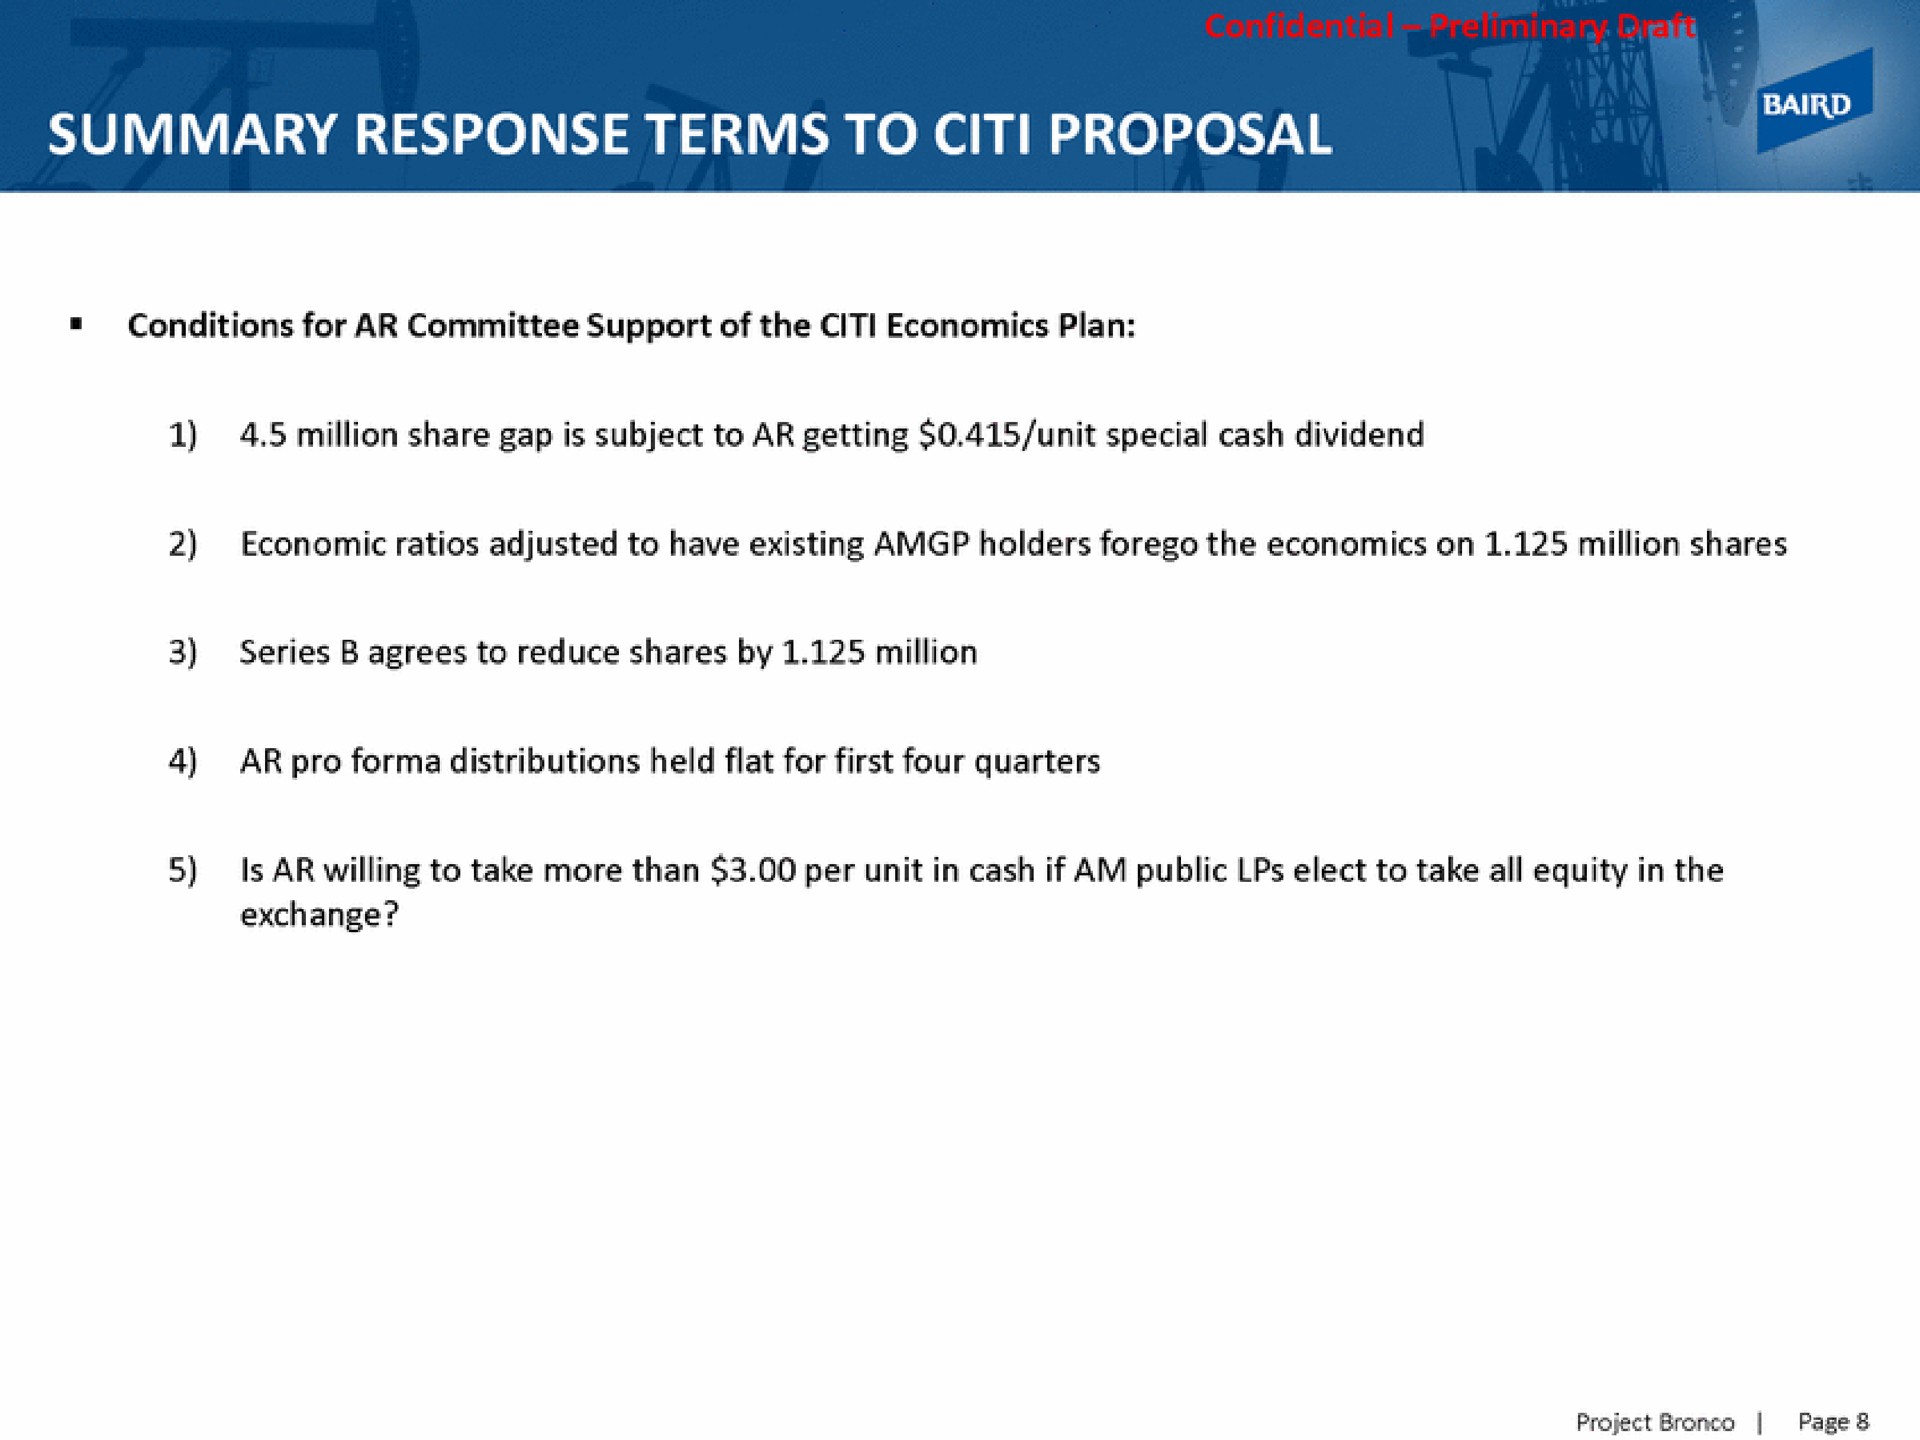 summary response terms to proposal | Baird